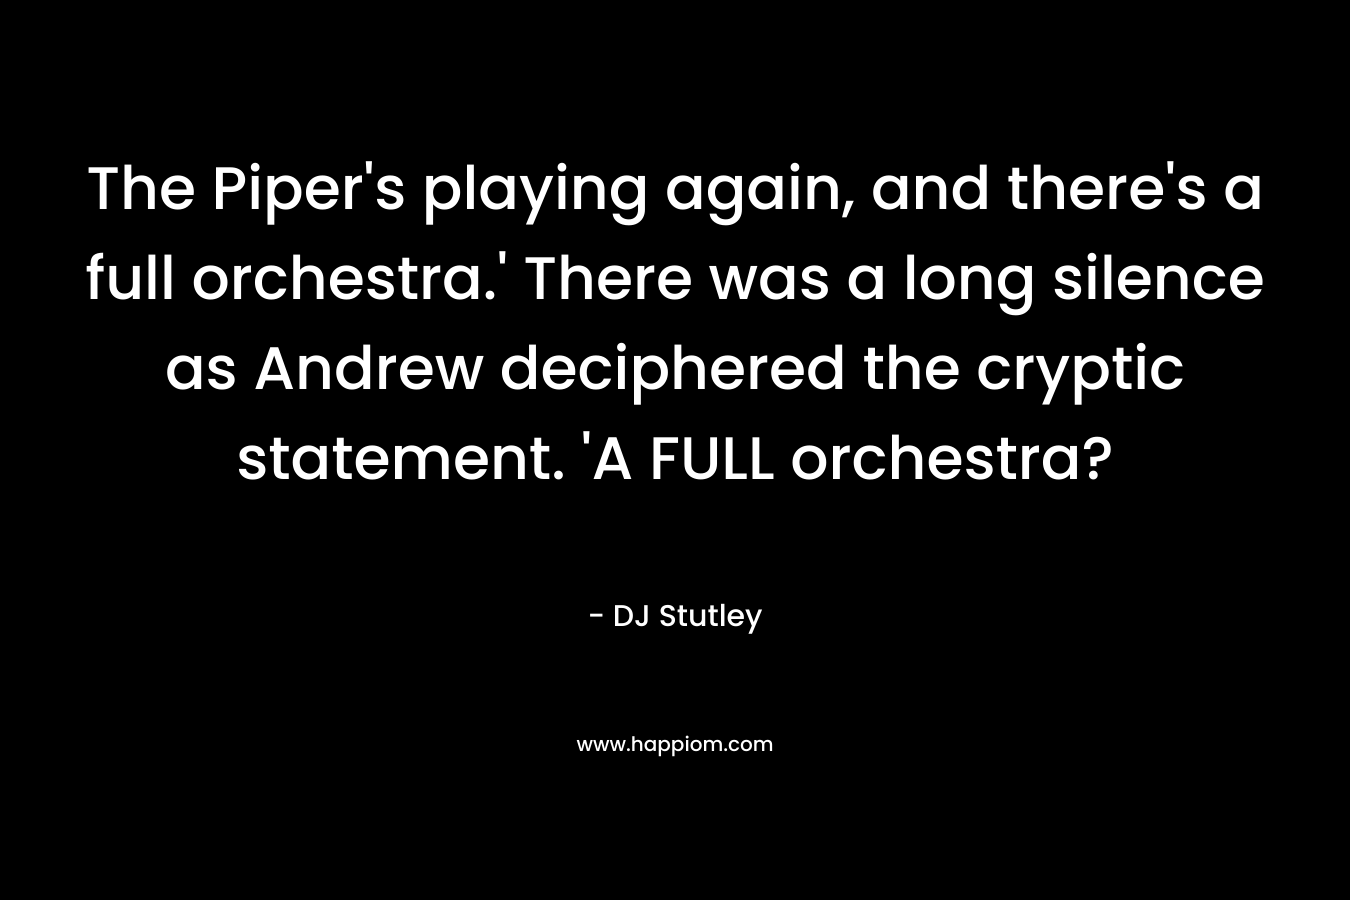 The Piper’s playing again, and there’s a full orchestra.’ There was a long silence as Andrew deciphered the cryptic statement. ‘A FULL orchestra? – DJ Stutley